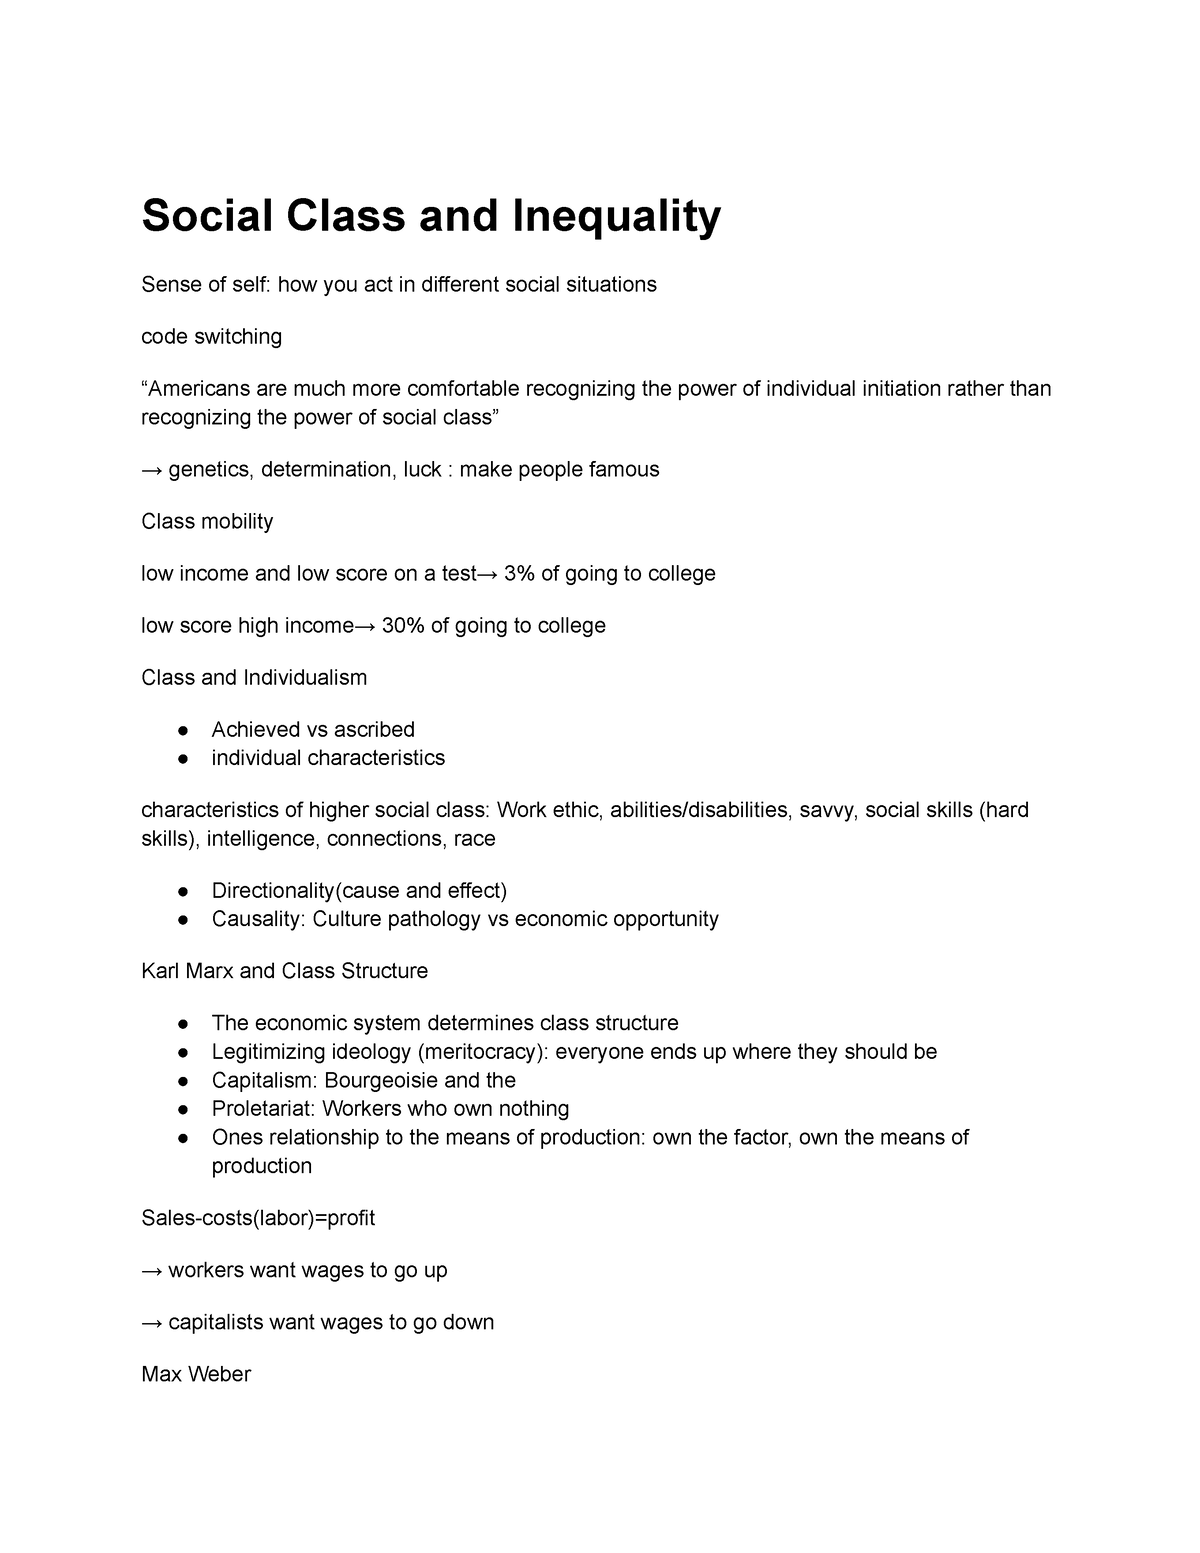 essay about social class and inequality